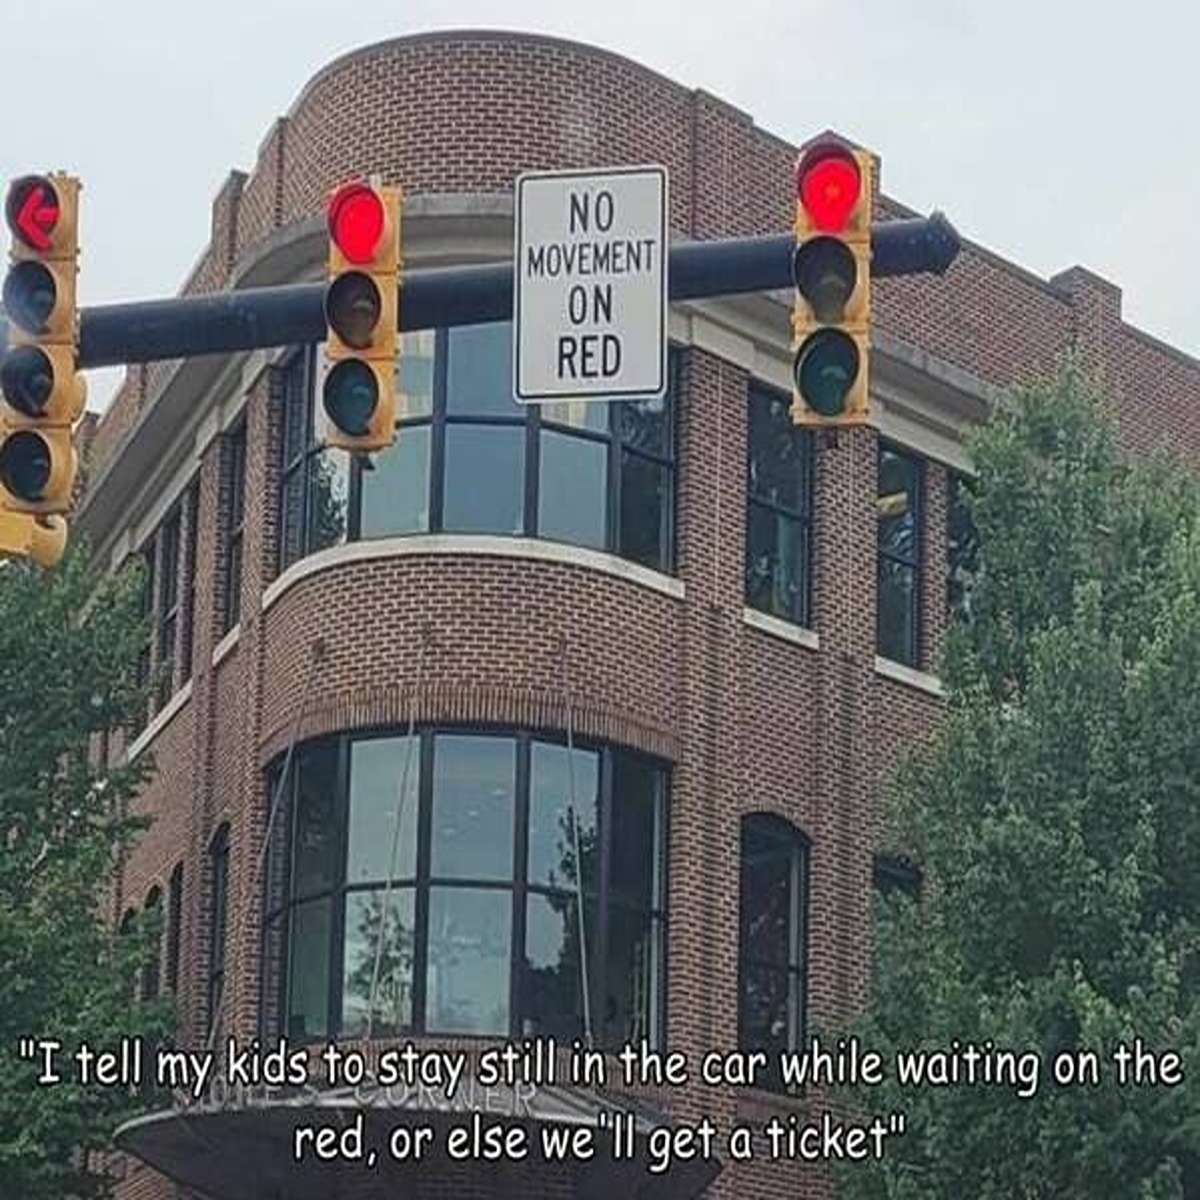 dank memes - architecture - O No Movement On Red "I tell my kids to stay still in the car while waiting on the red, or else we'll get a ticket"